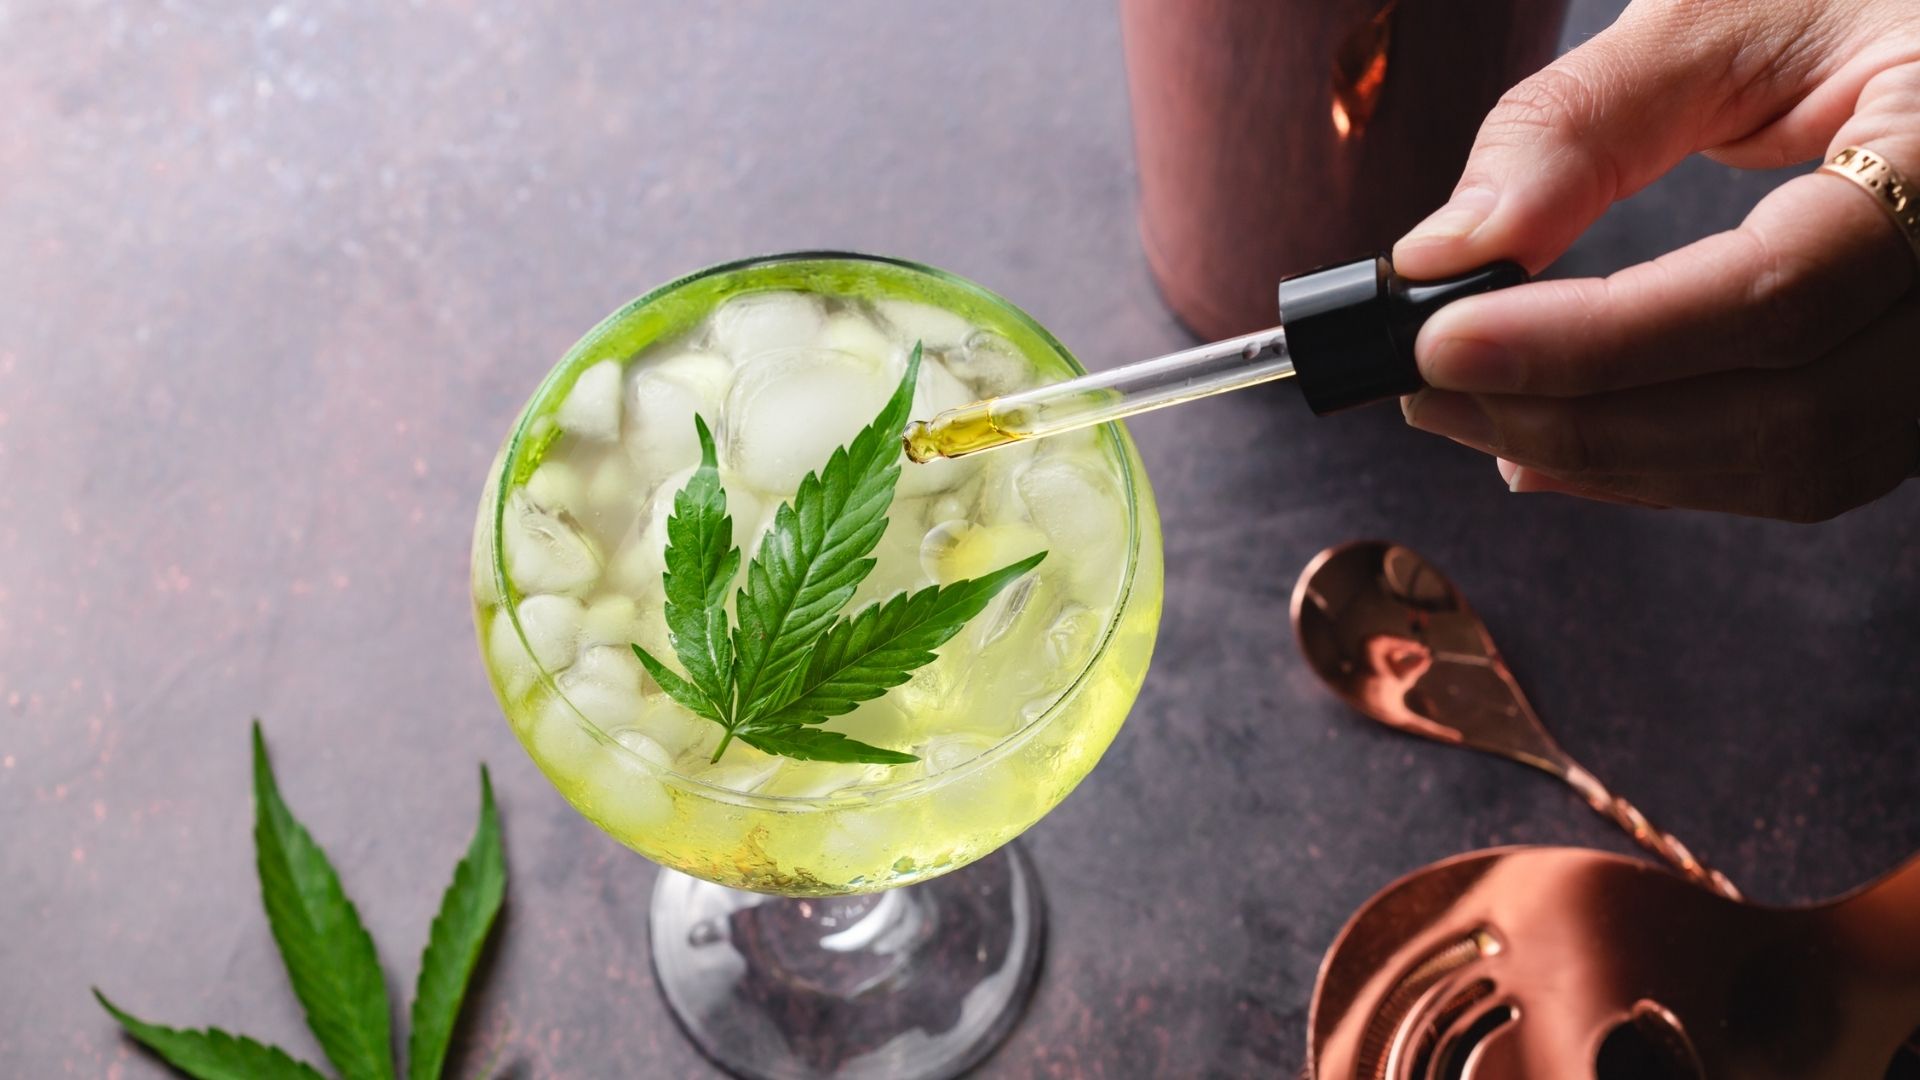 One-Third of Gen Z Doing “Dry January” Say They’re Replacing Booze With Weed